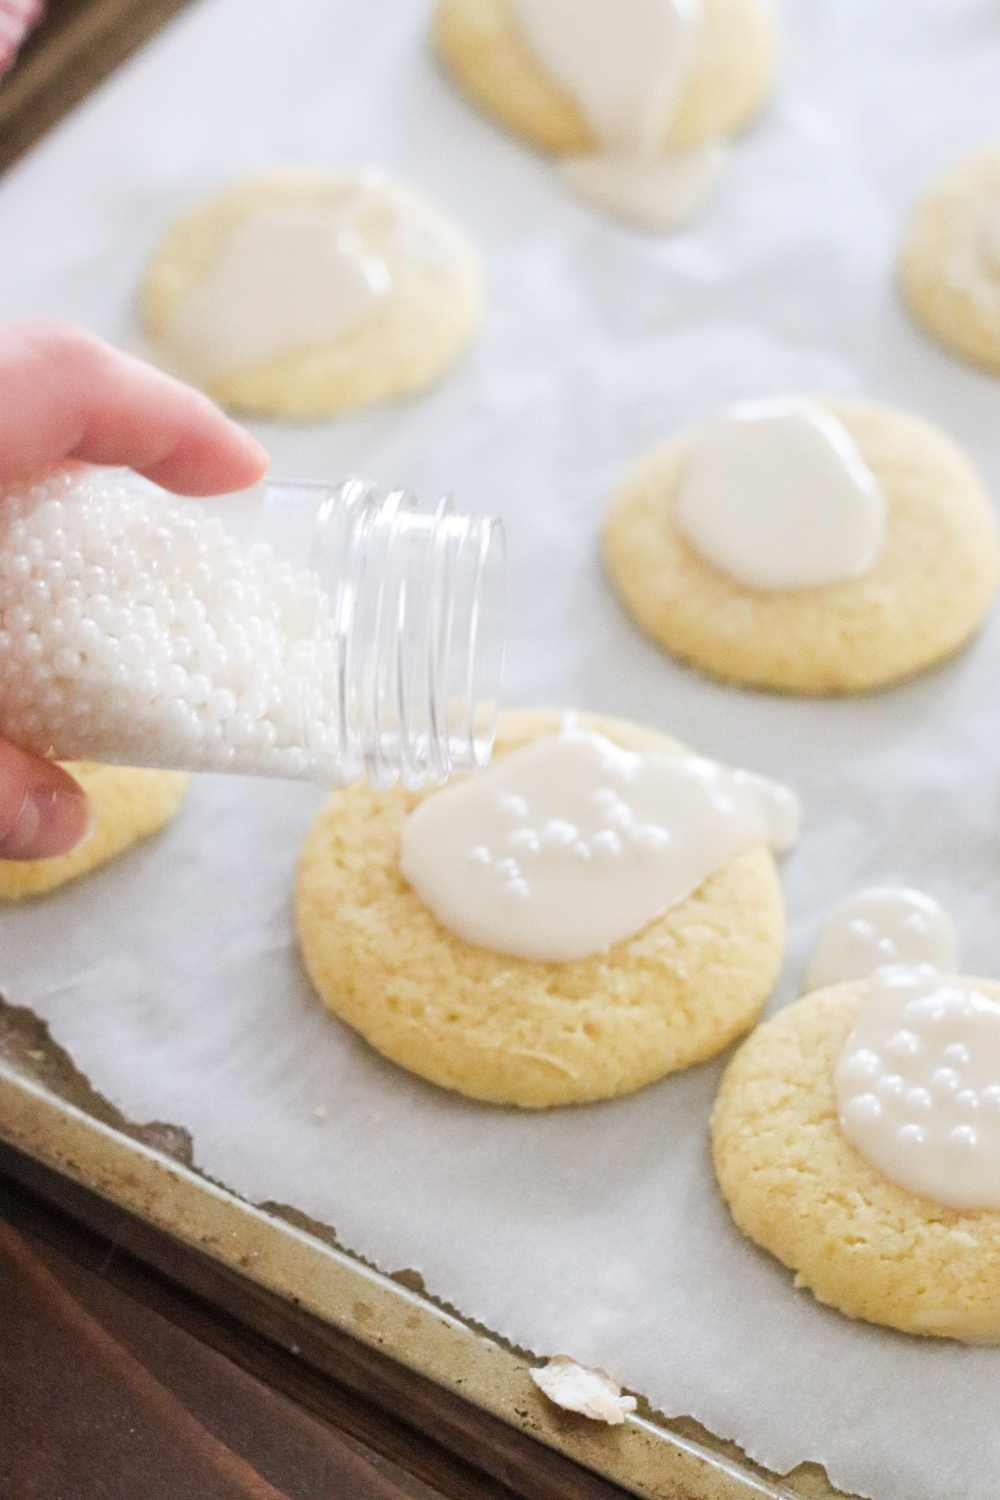 1-how-to-make-gluten-free-dairy-free-sugar-cookies-recipe-with-coconut-oil-christmas-cookies-recipes